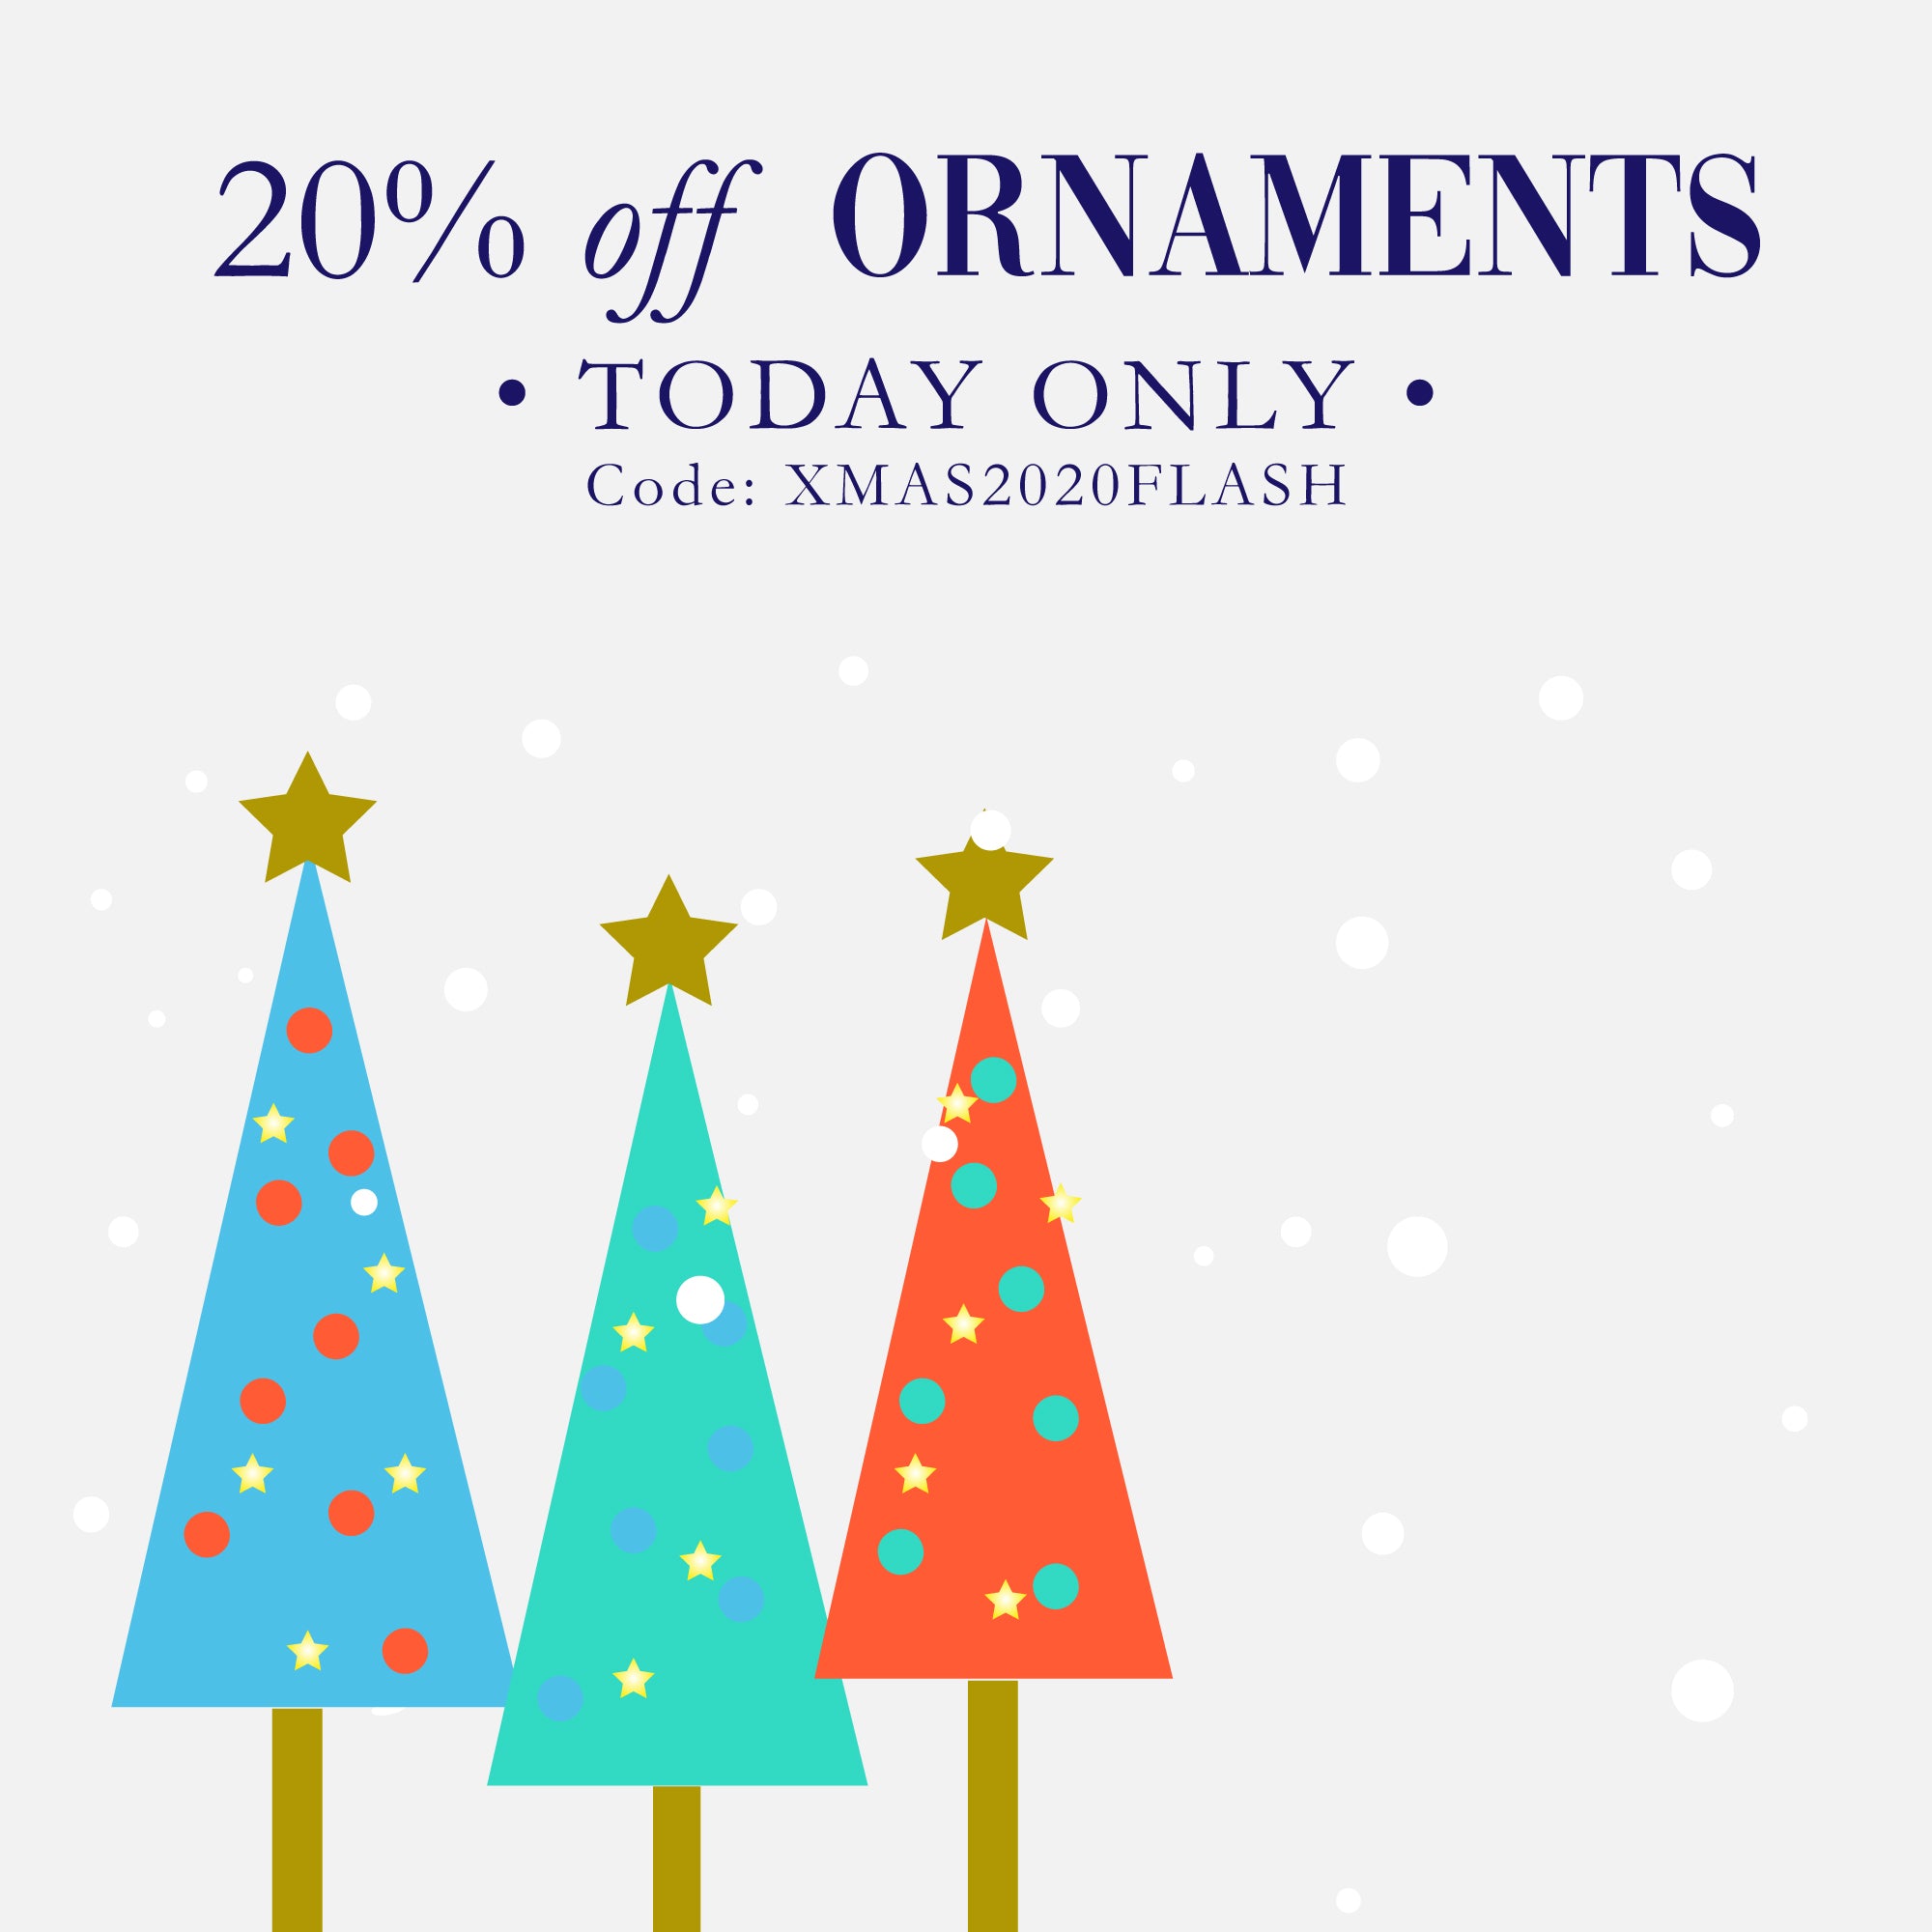 20% off ornaments today